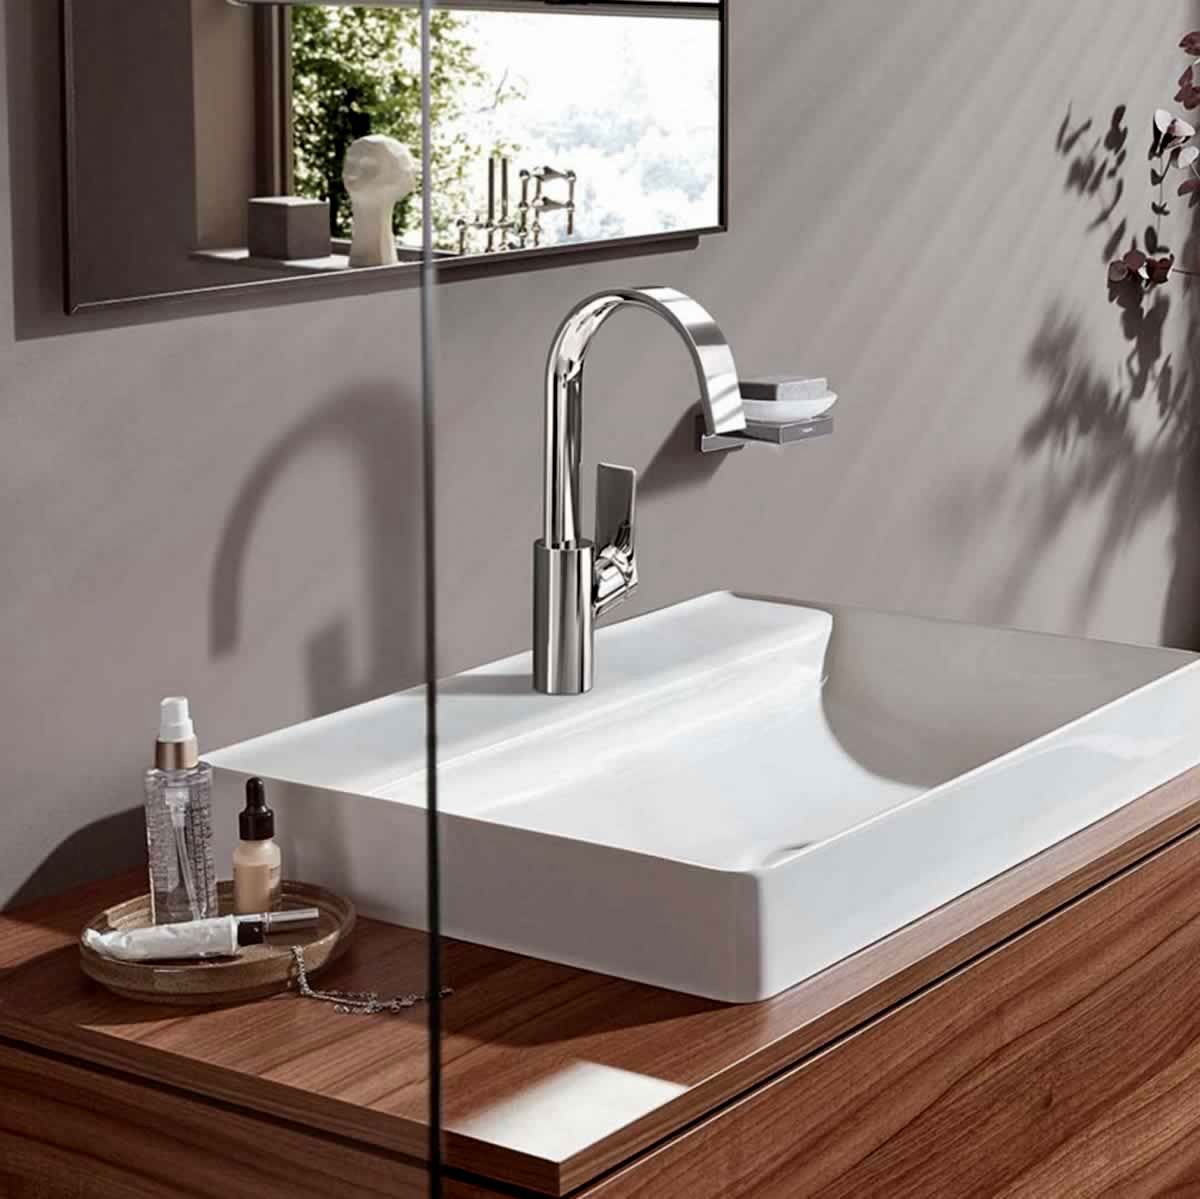 Hansgrohe Vivenis Basin Mixer 210 With Swivel Spout And Pop-Up Waste Set In Chrome - 75030000